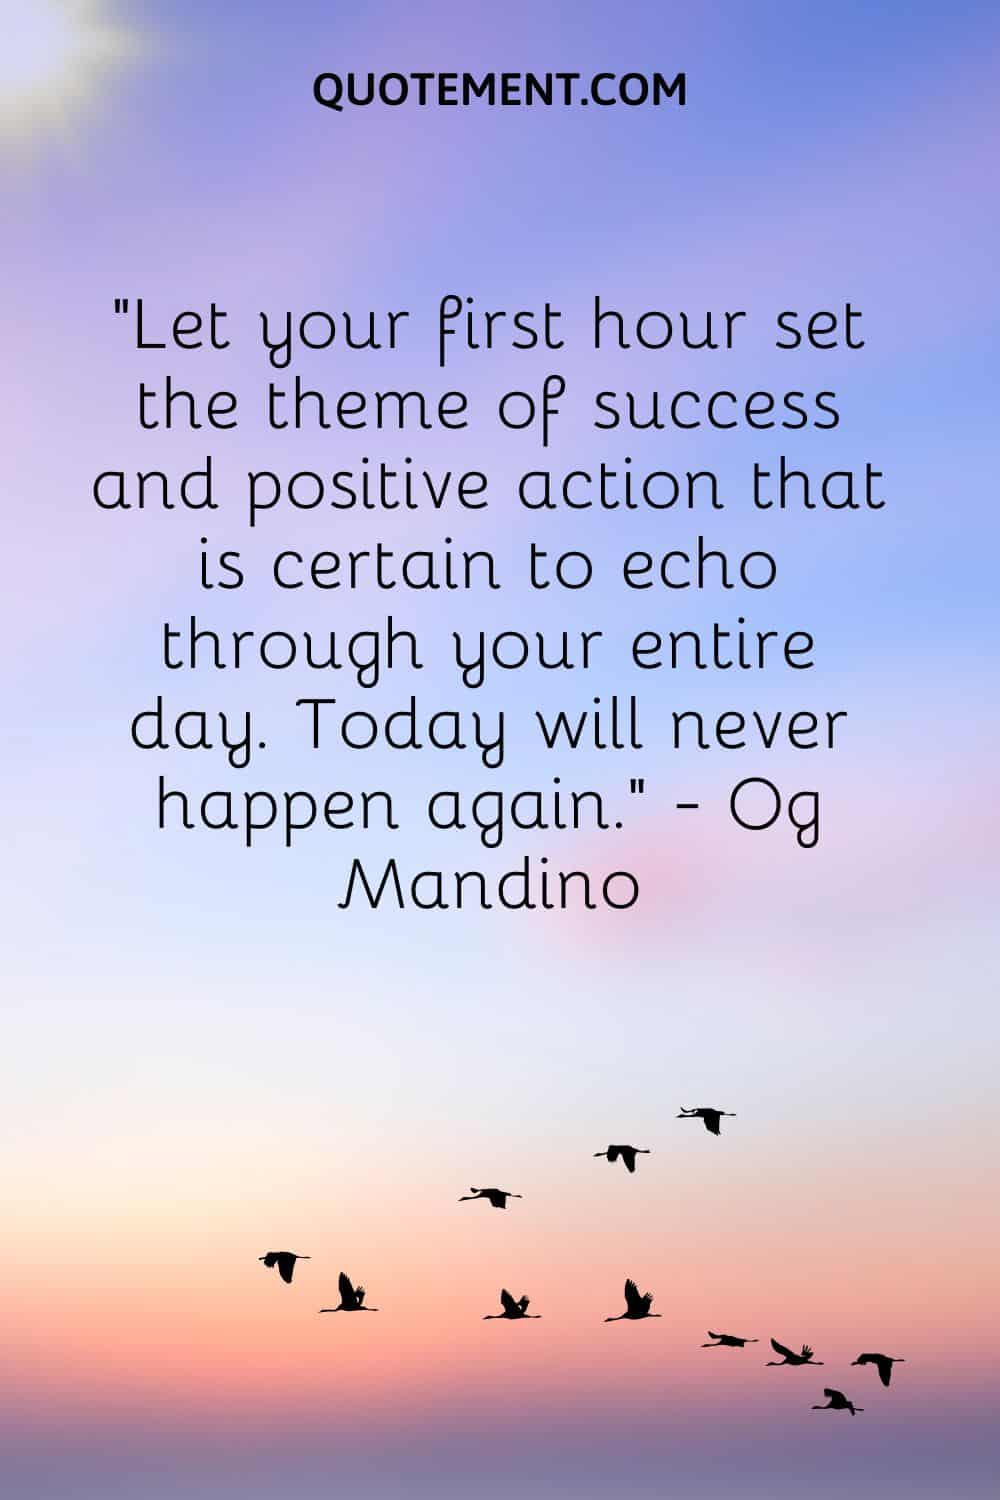 Let your first hour set the theme of success and positive action that is certain to echo through your entire day